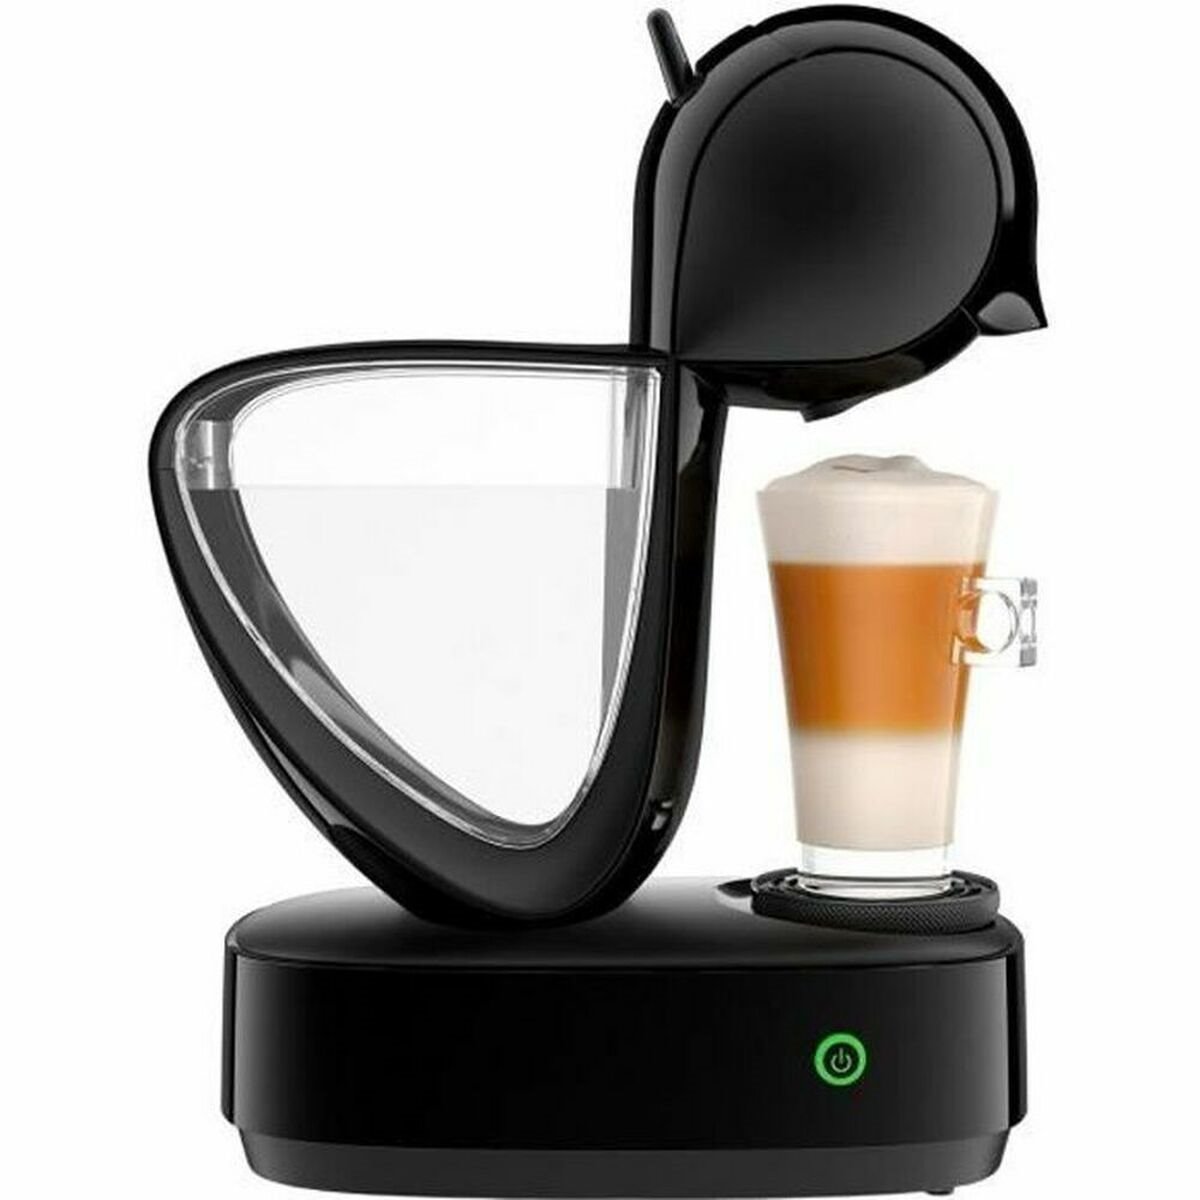 Cafetera Dolce Gusto KRUPS MINI ME KP1208 - Conforama